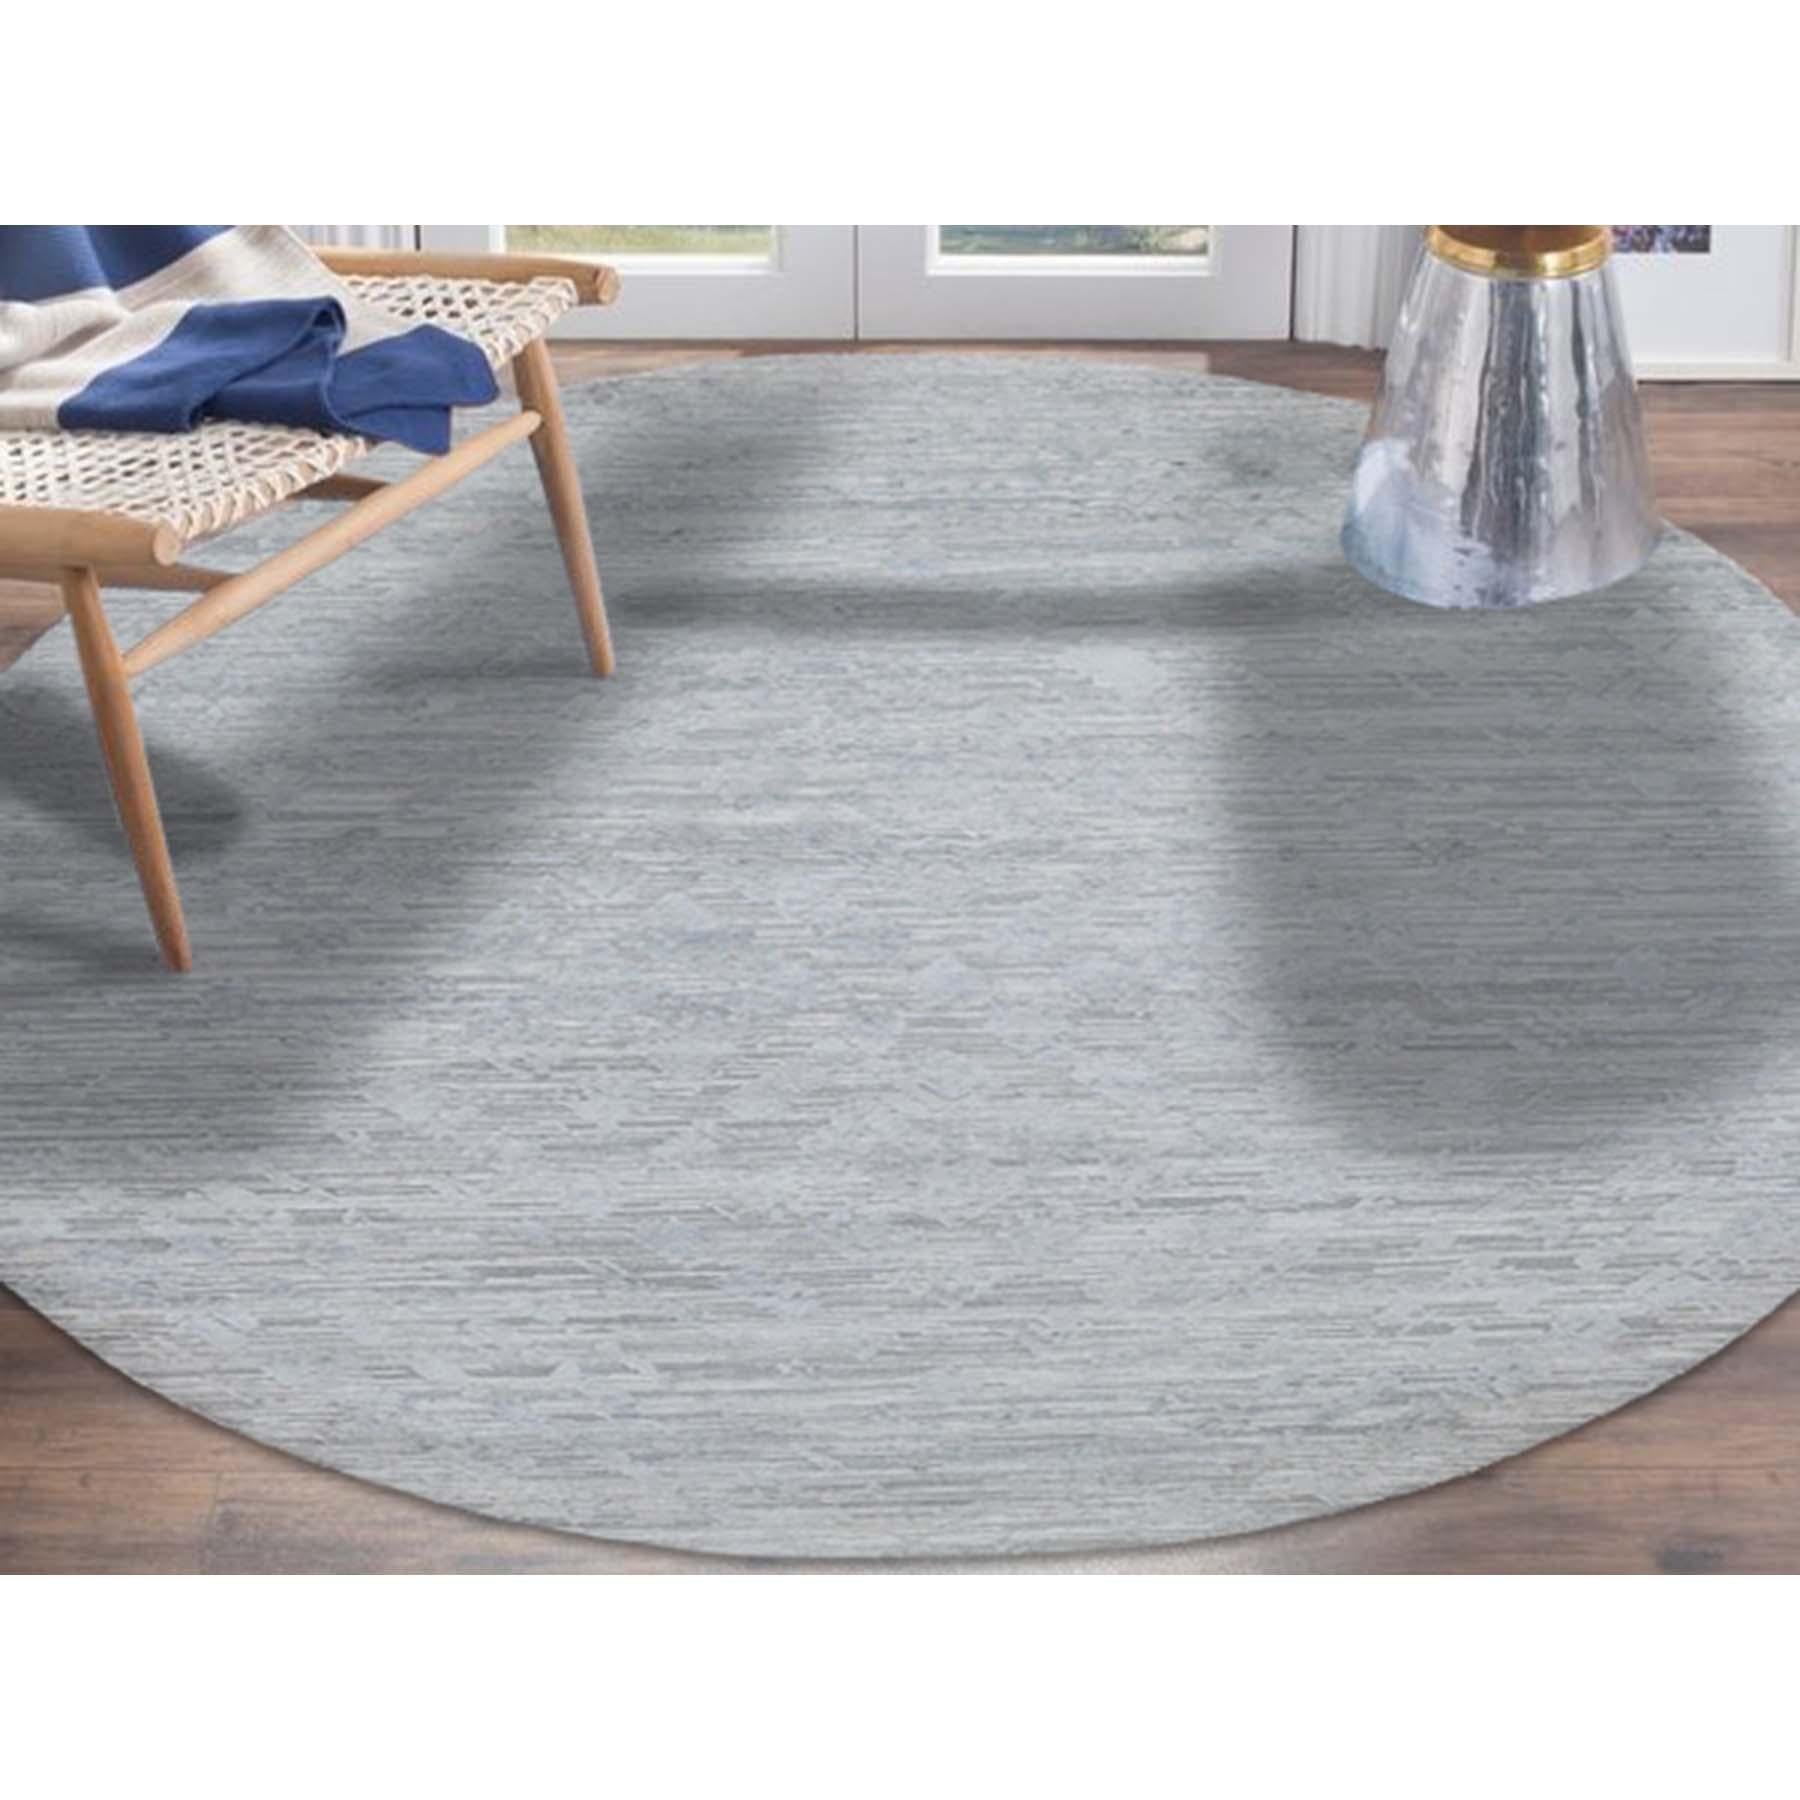 This is a truly genuine one-of-a-kind silver round hand spun undyed natural wool modern hand-knotted rug. It has been knotted for months and months in the centuries-old Persian weaving craftsmanship techniques by expert artisans. Measures: 10'0